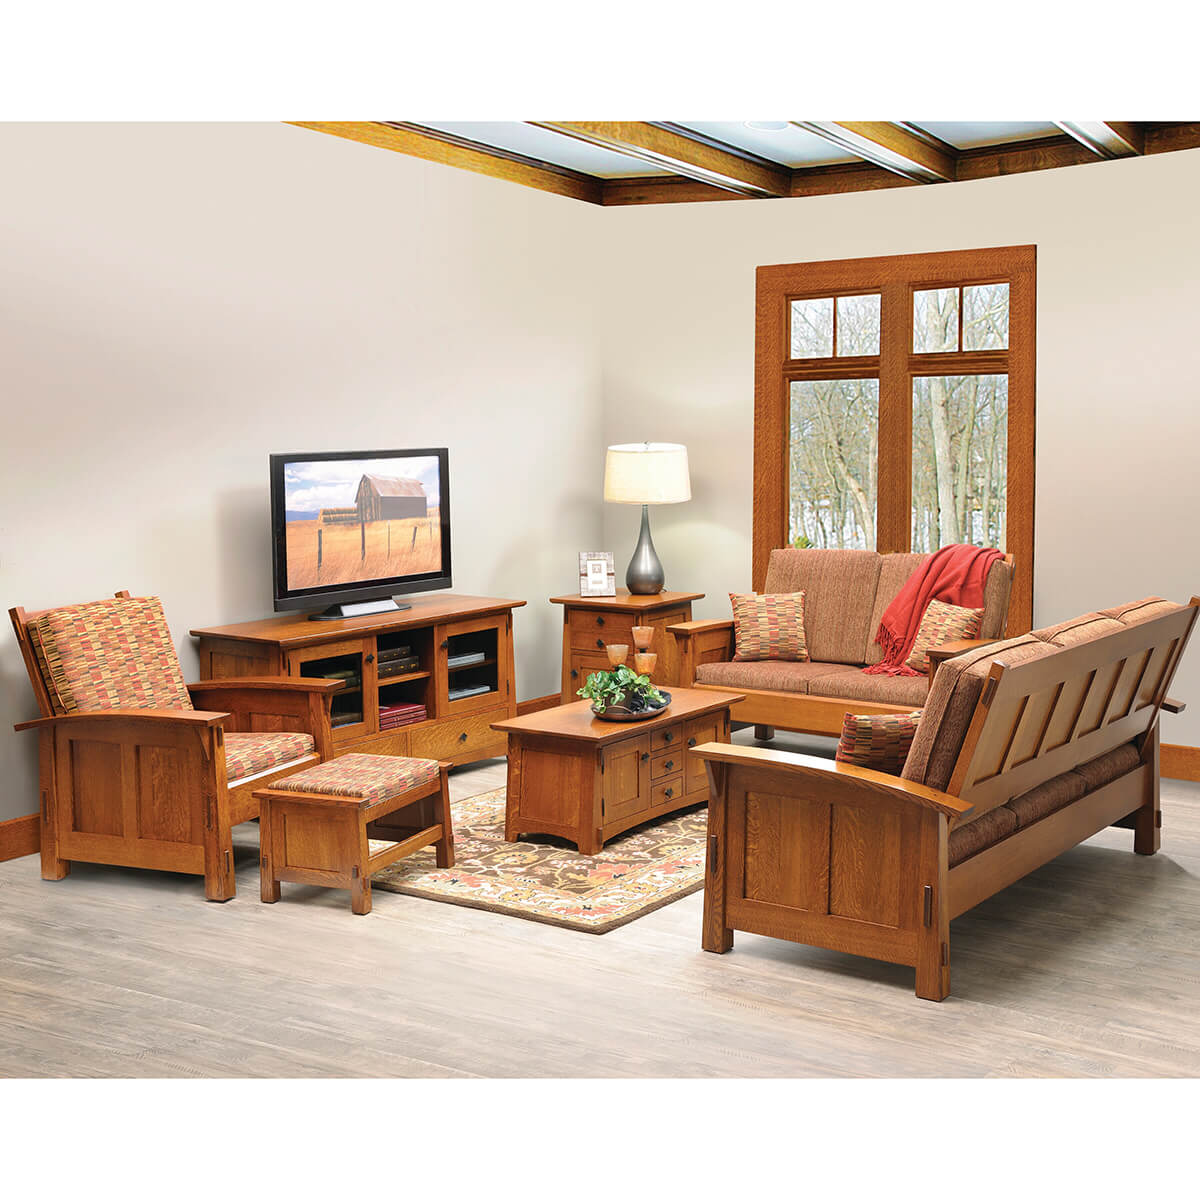 Read more about the article Olde Shaker Living Room Collection